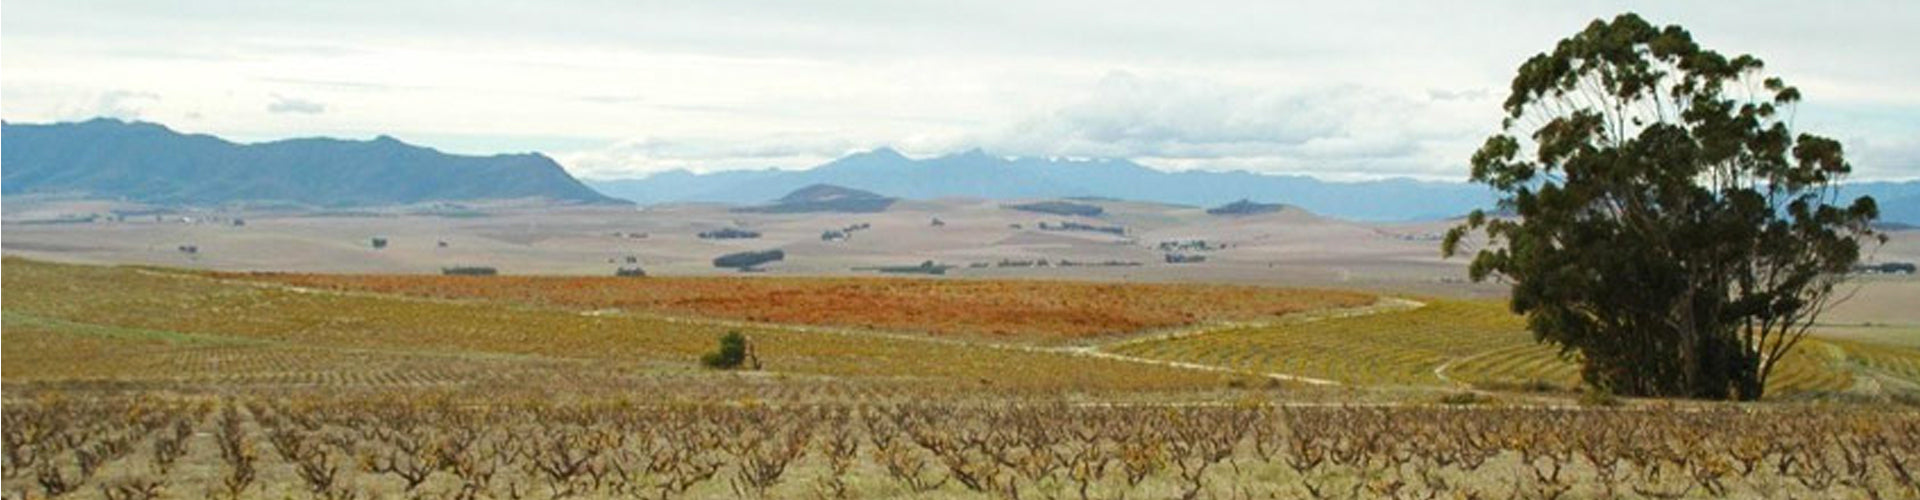 Rall Vineyards in South Africa